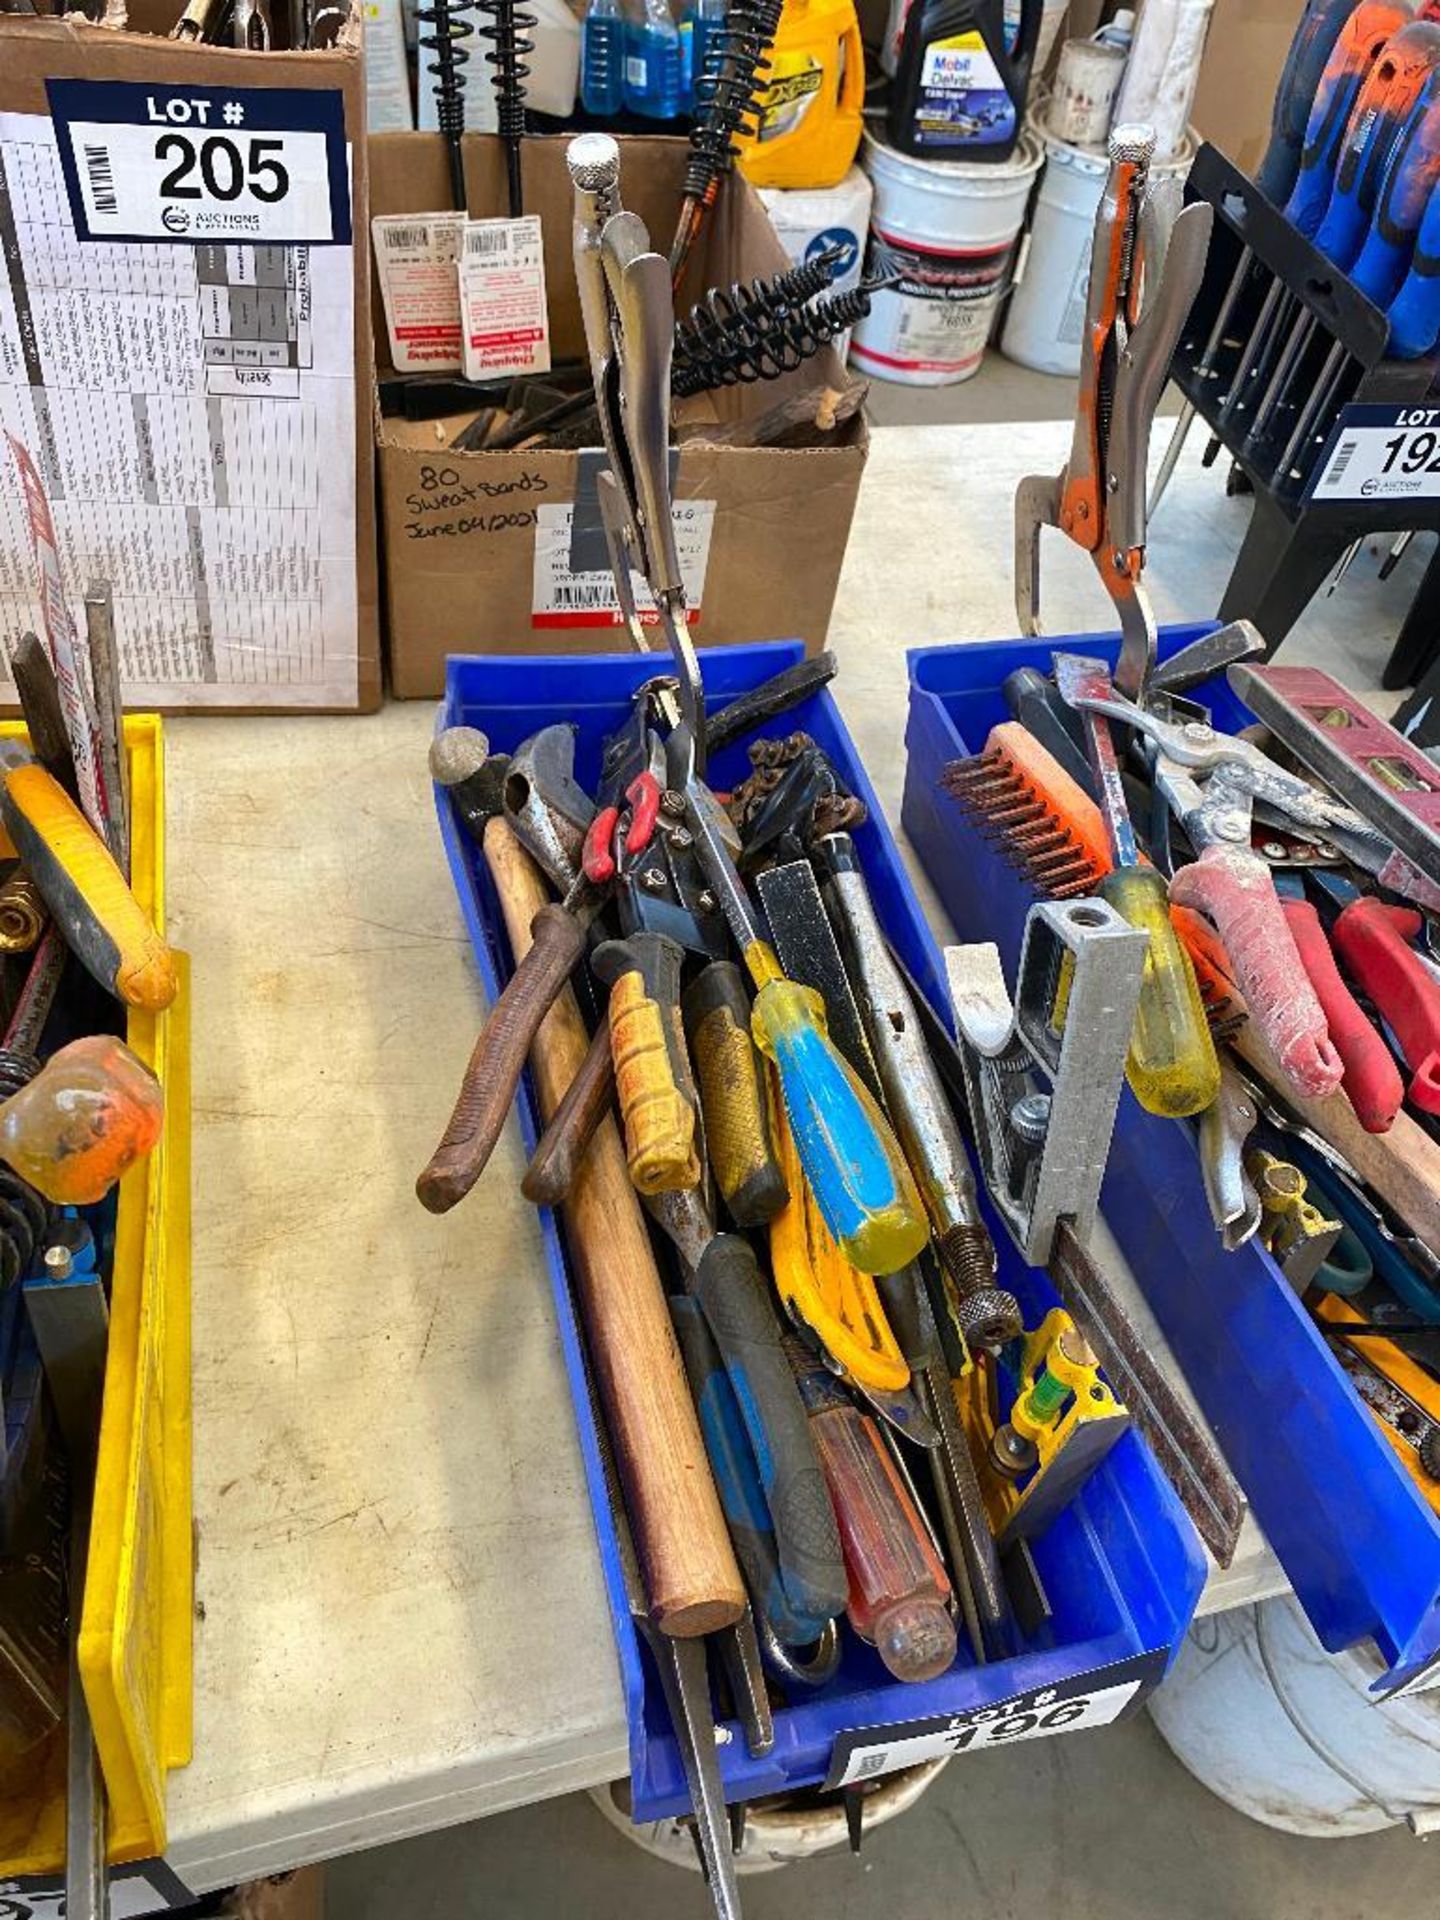 Lot of Asst. Hammers, Wrenches, Vise Grips, Screwdrivers, etc.